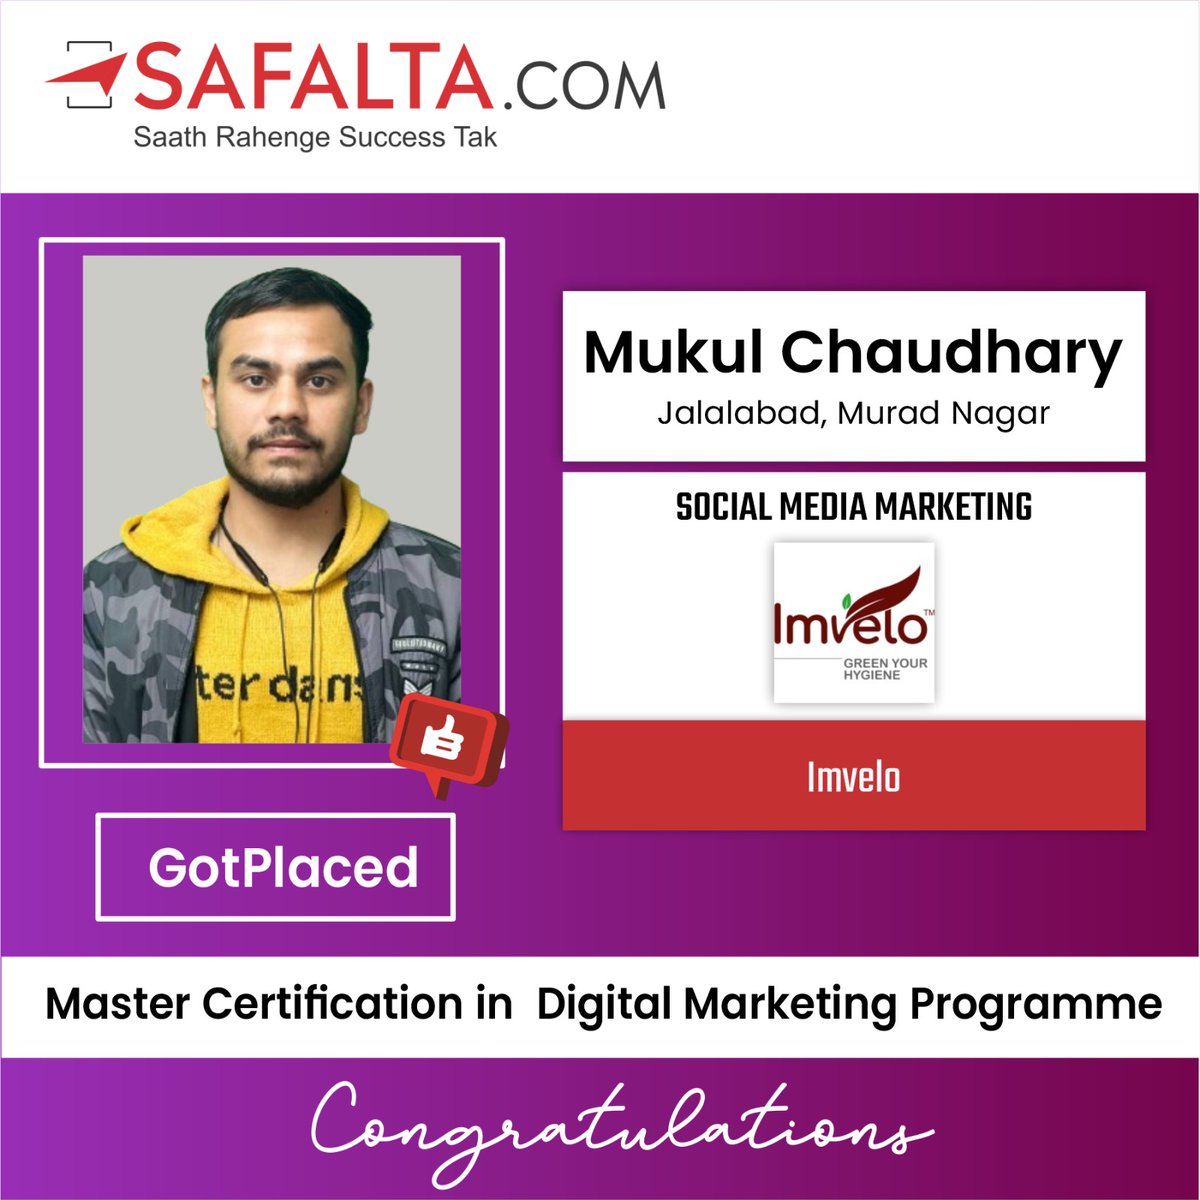 Meet Mukul Chaudhary, who secured a paid internship at Imvelo Homecare with the help of Safalta's Master Certification in Digital Marketing Program.
You can also achieve remarkable career milestones in just 6 months!
Call Now: 8882765825
#Digitalmarketingjobs #Digitalskills